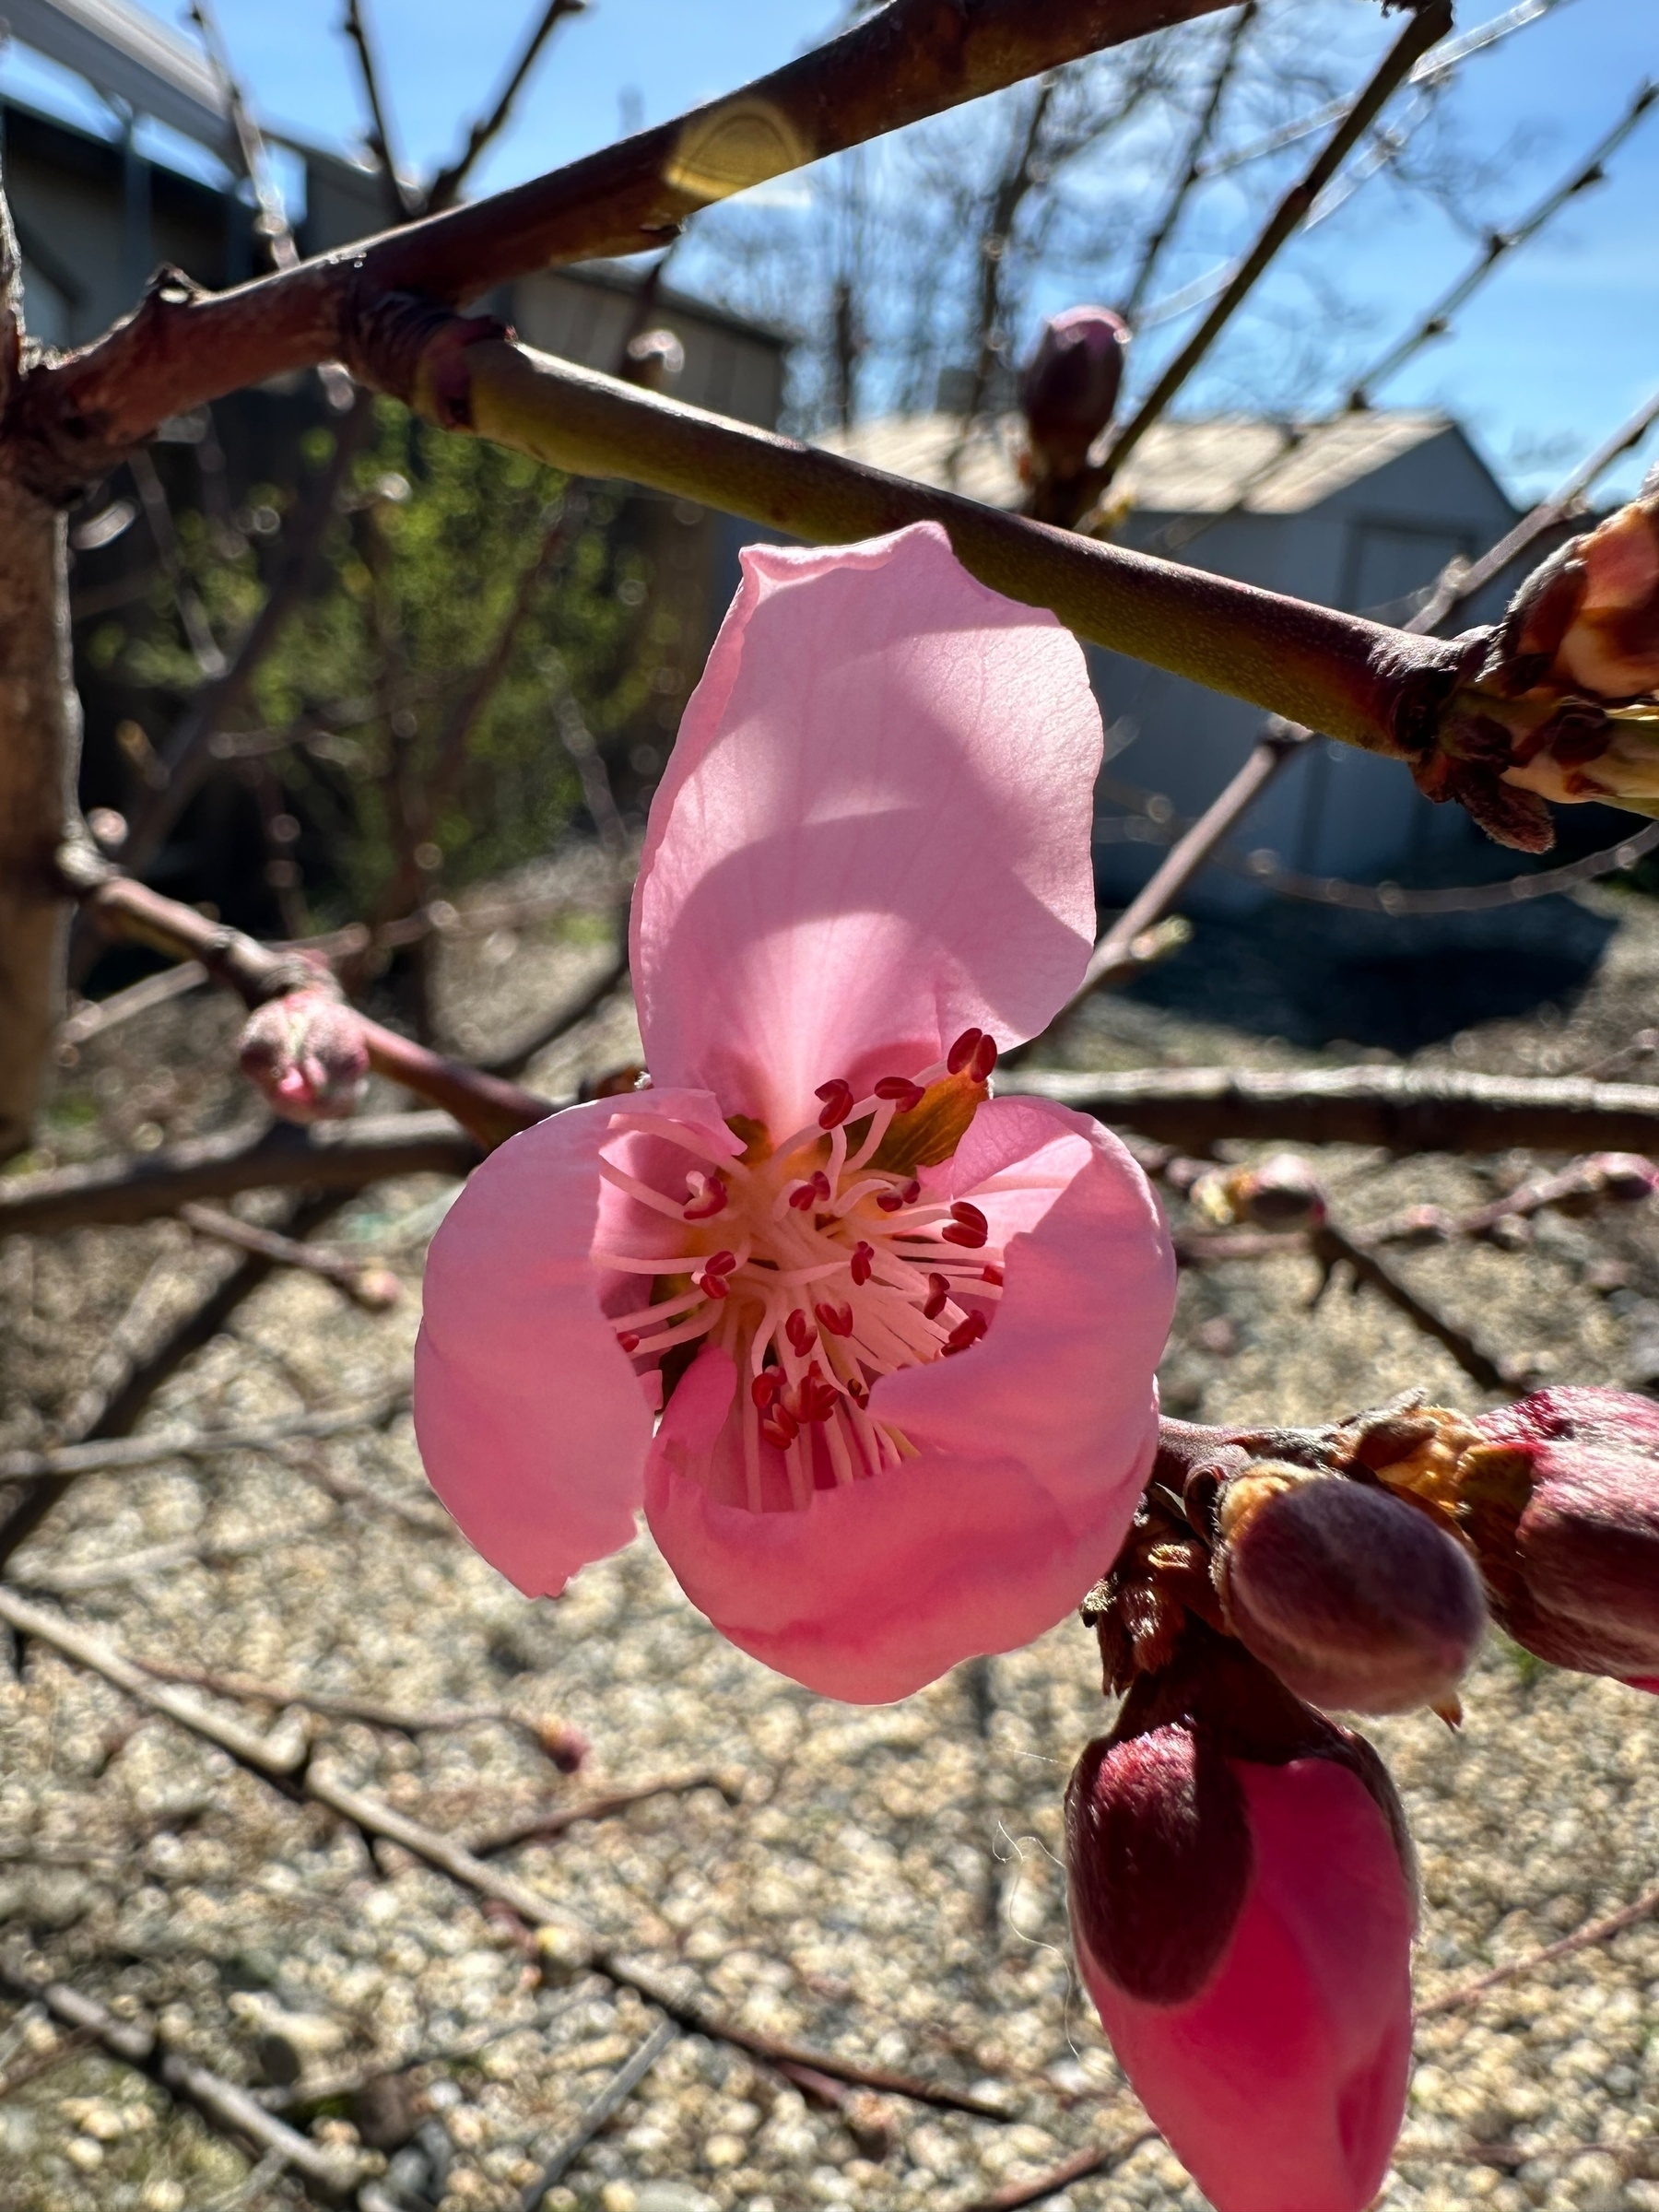 A close-up of a pink nectarine blossom on a tree branch with buds and a bright blue sky in the background.